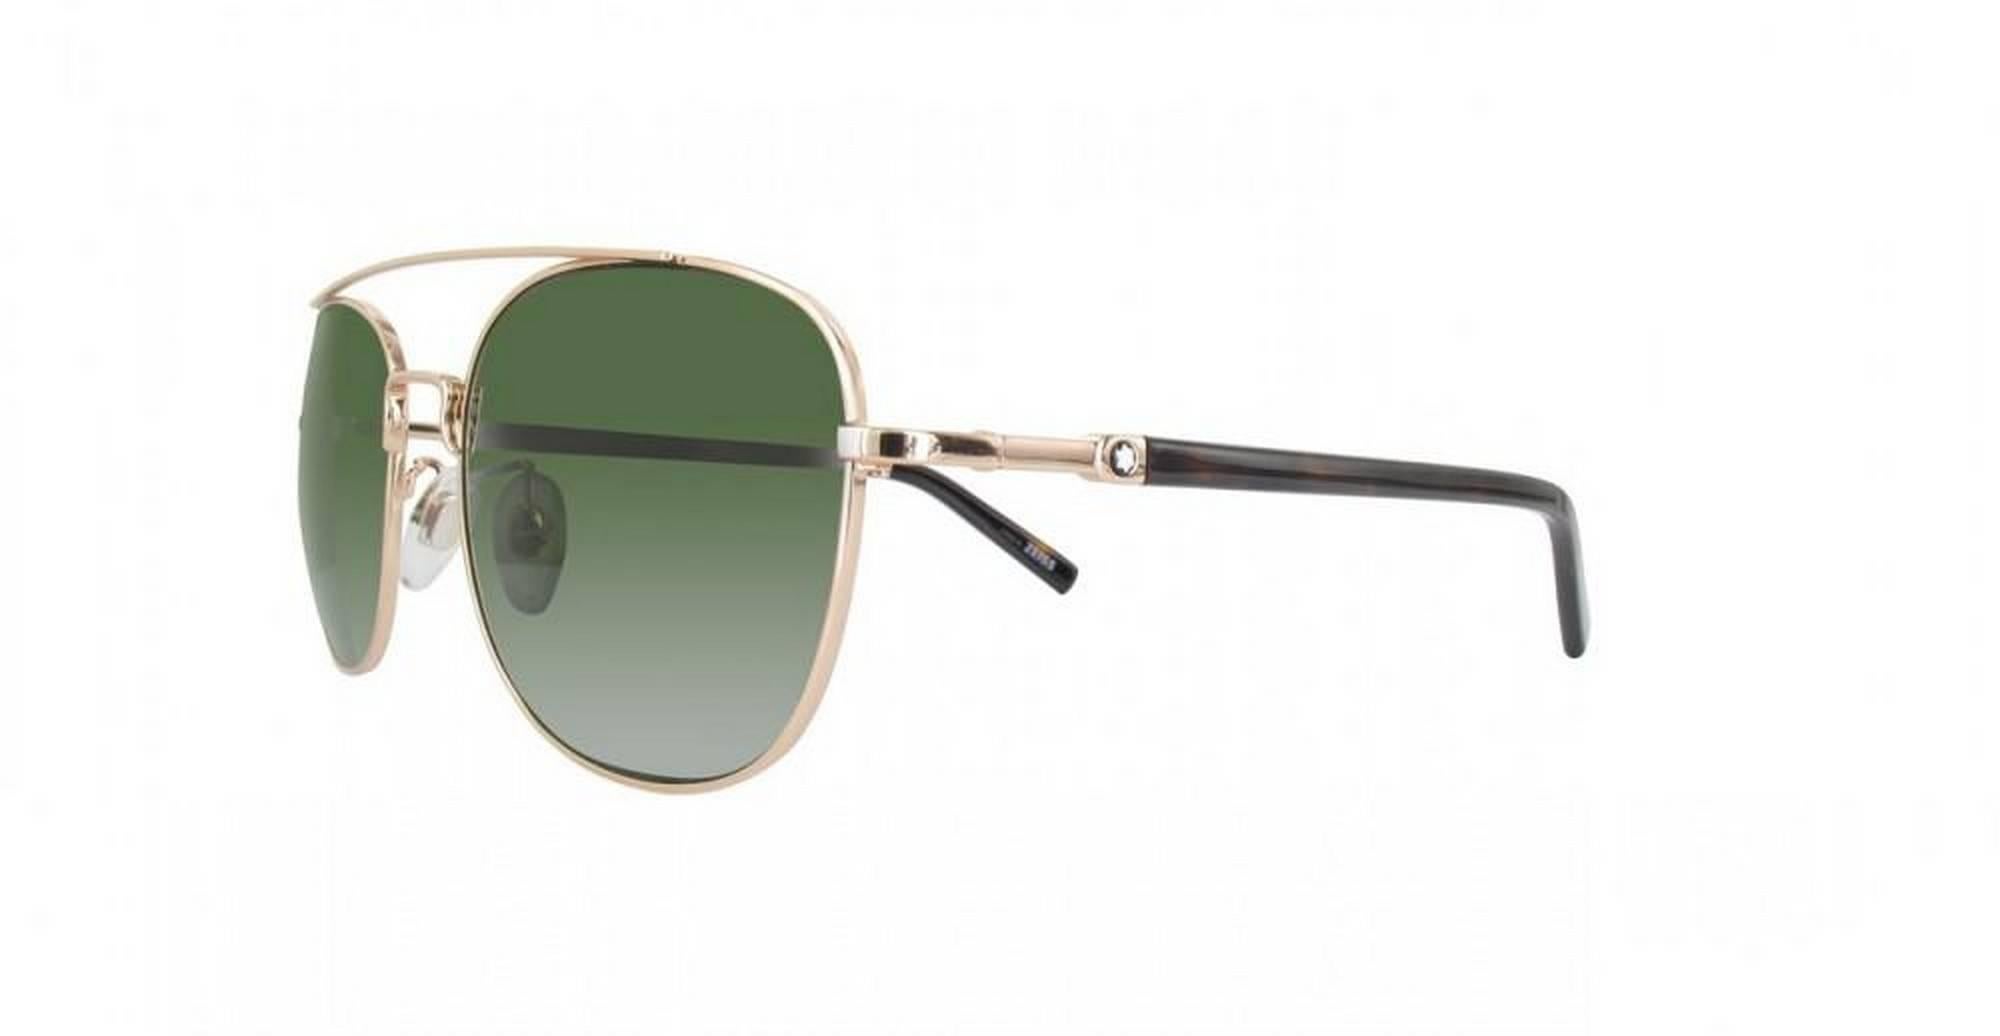 Montblanc MB597SF-28N-57 Metal Shimmering Rose Gold - Green Sunglasses
Brand: Montblanc
Style Code: MB597SF-28N-57
Frame: Metal
Color: Shimmering Rose Gold - Green
Brand new condition. 
Original case and cloth included. 
Made in Italy.